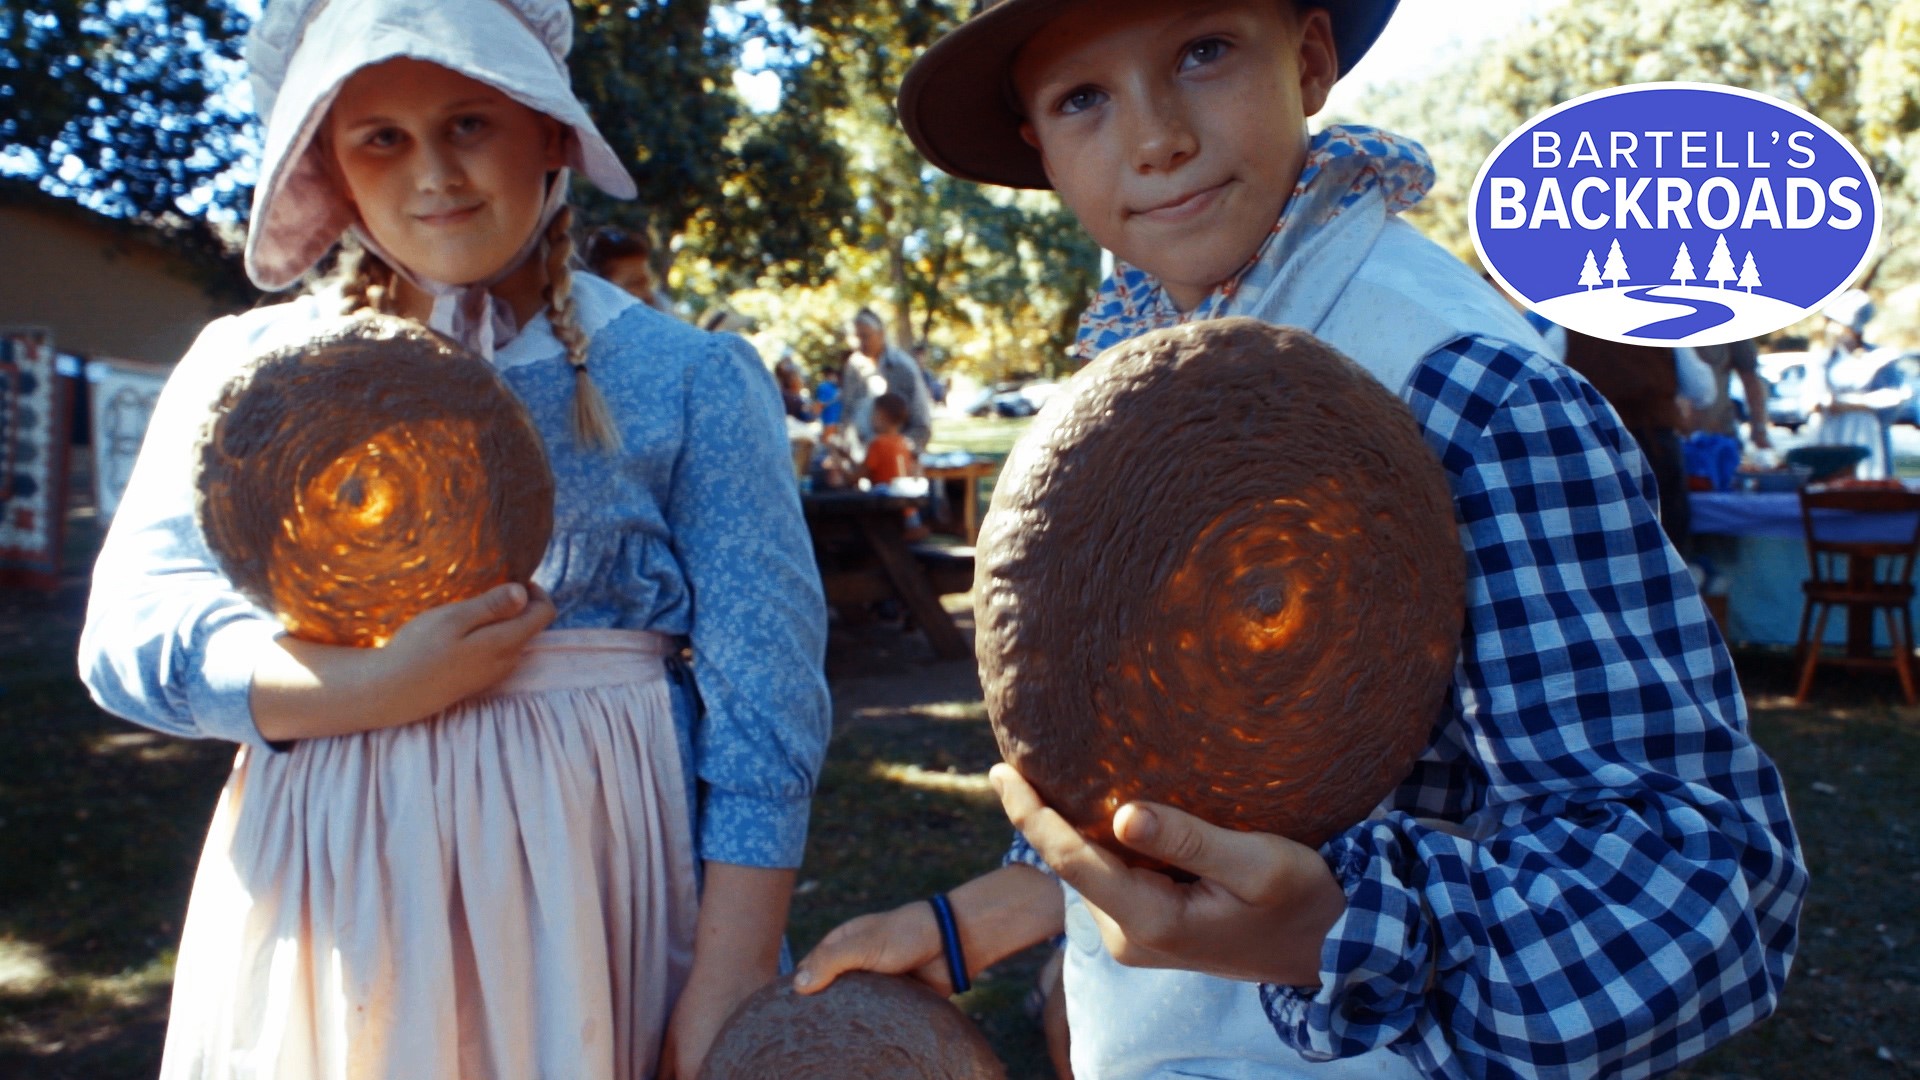 Plus, bored settler kids turn tossing cow pies into a fun game? John Bartell reveals all from the backroads of William Ide Adobe State Park.